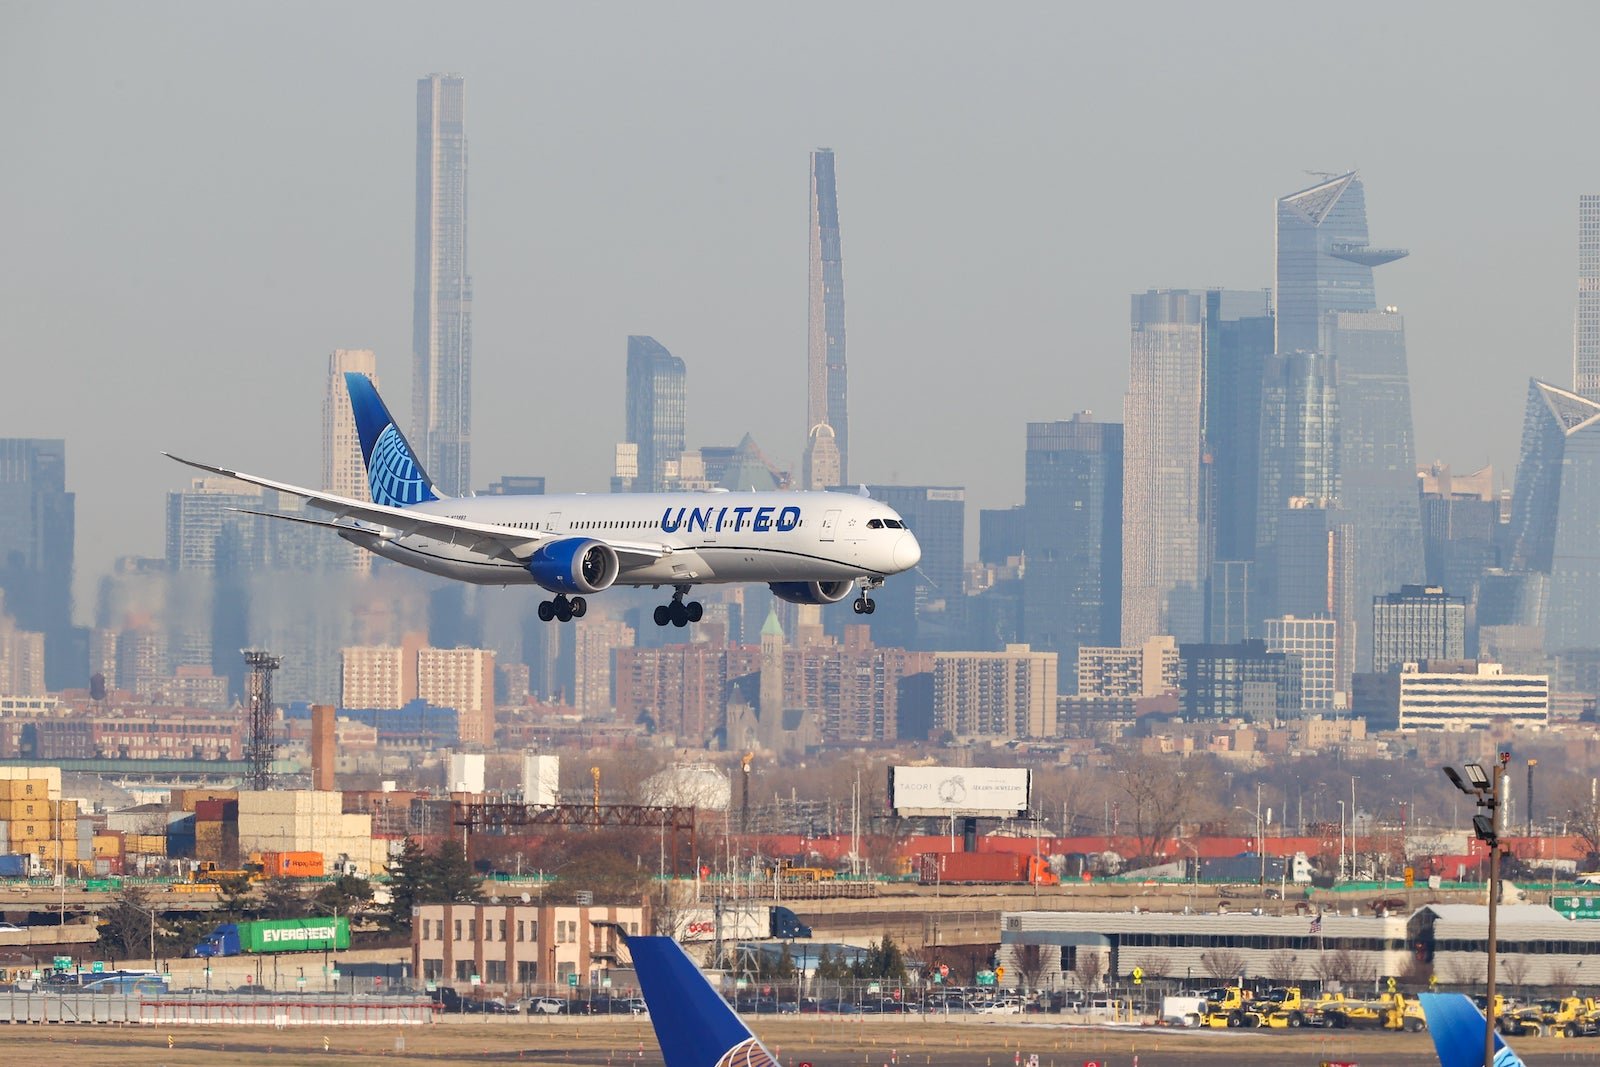 United will cut flights from Newark as delays and congestion get worse